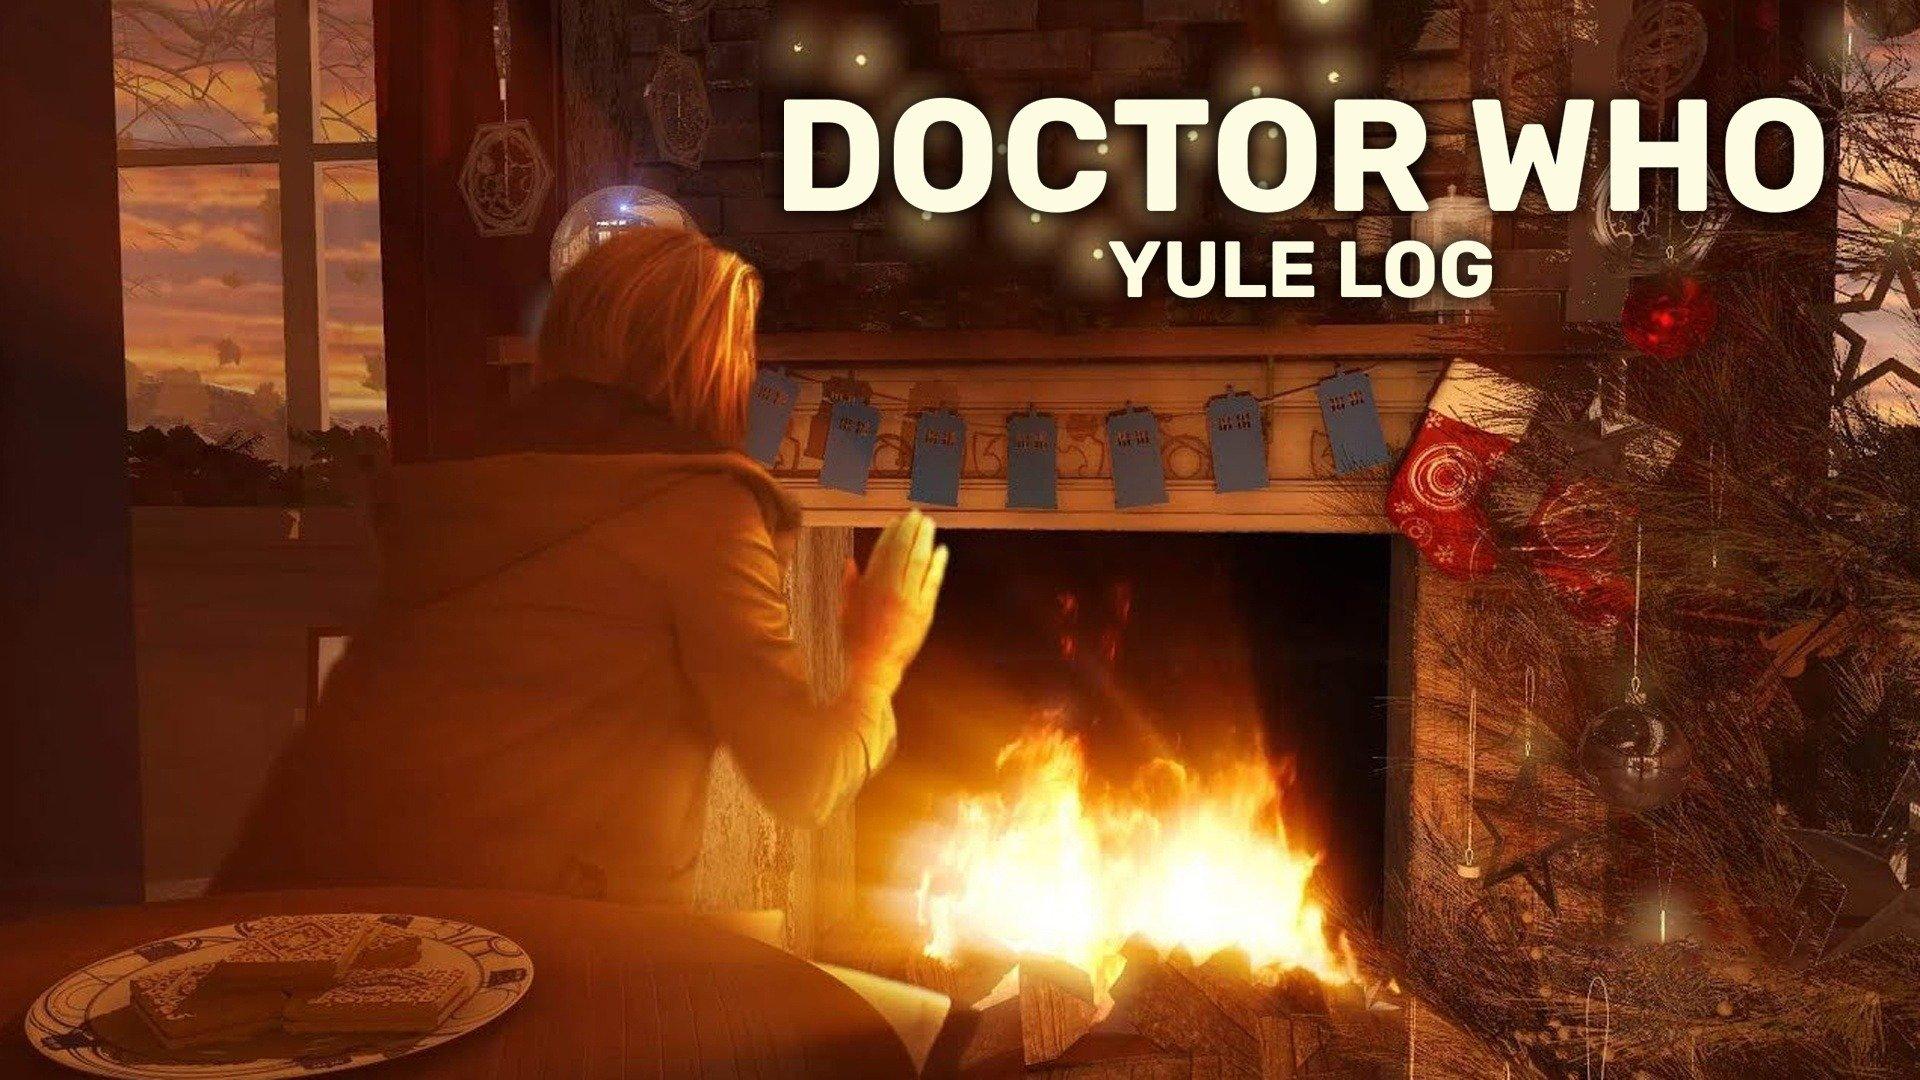 Watch Doctor Who Yule Log Streaming Online on Philo (Free Trial)